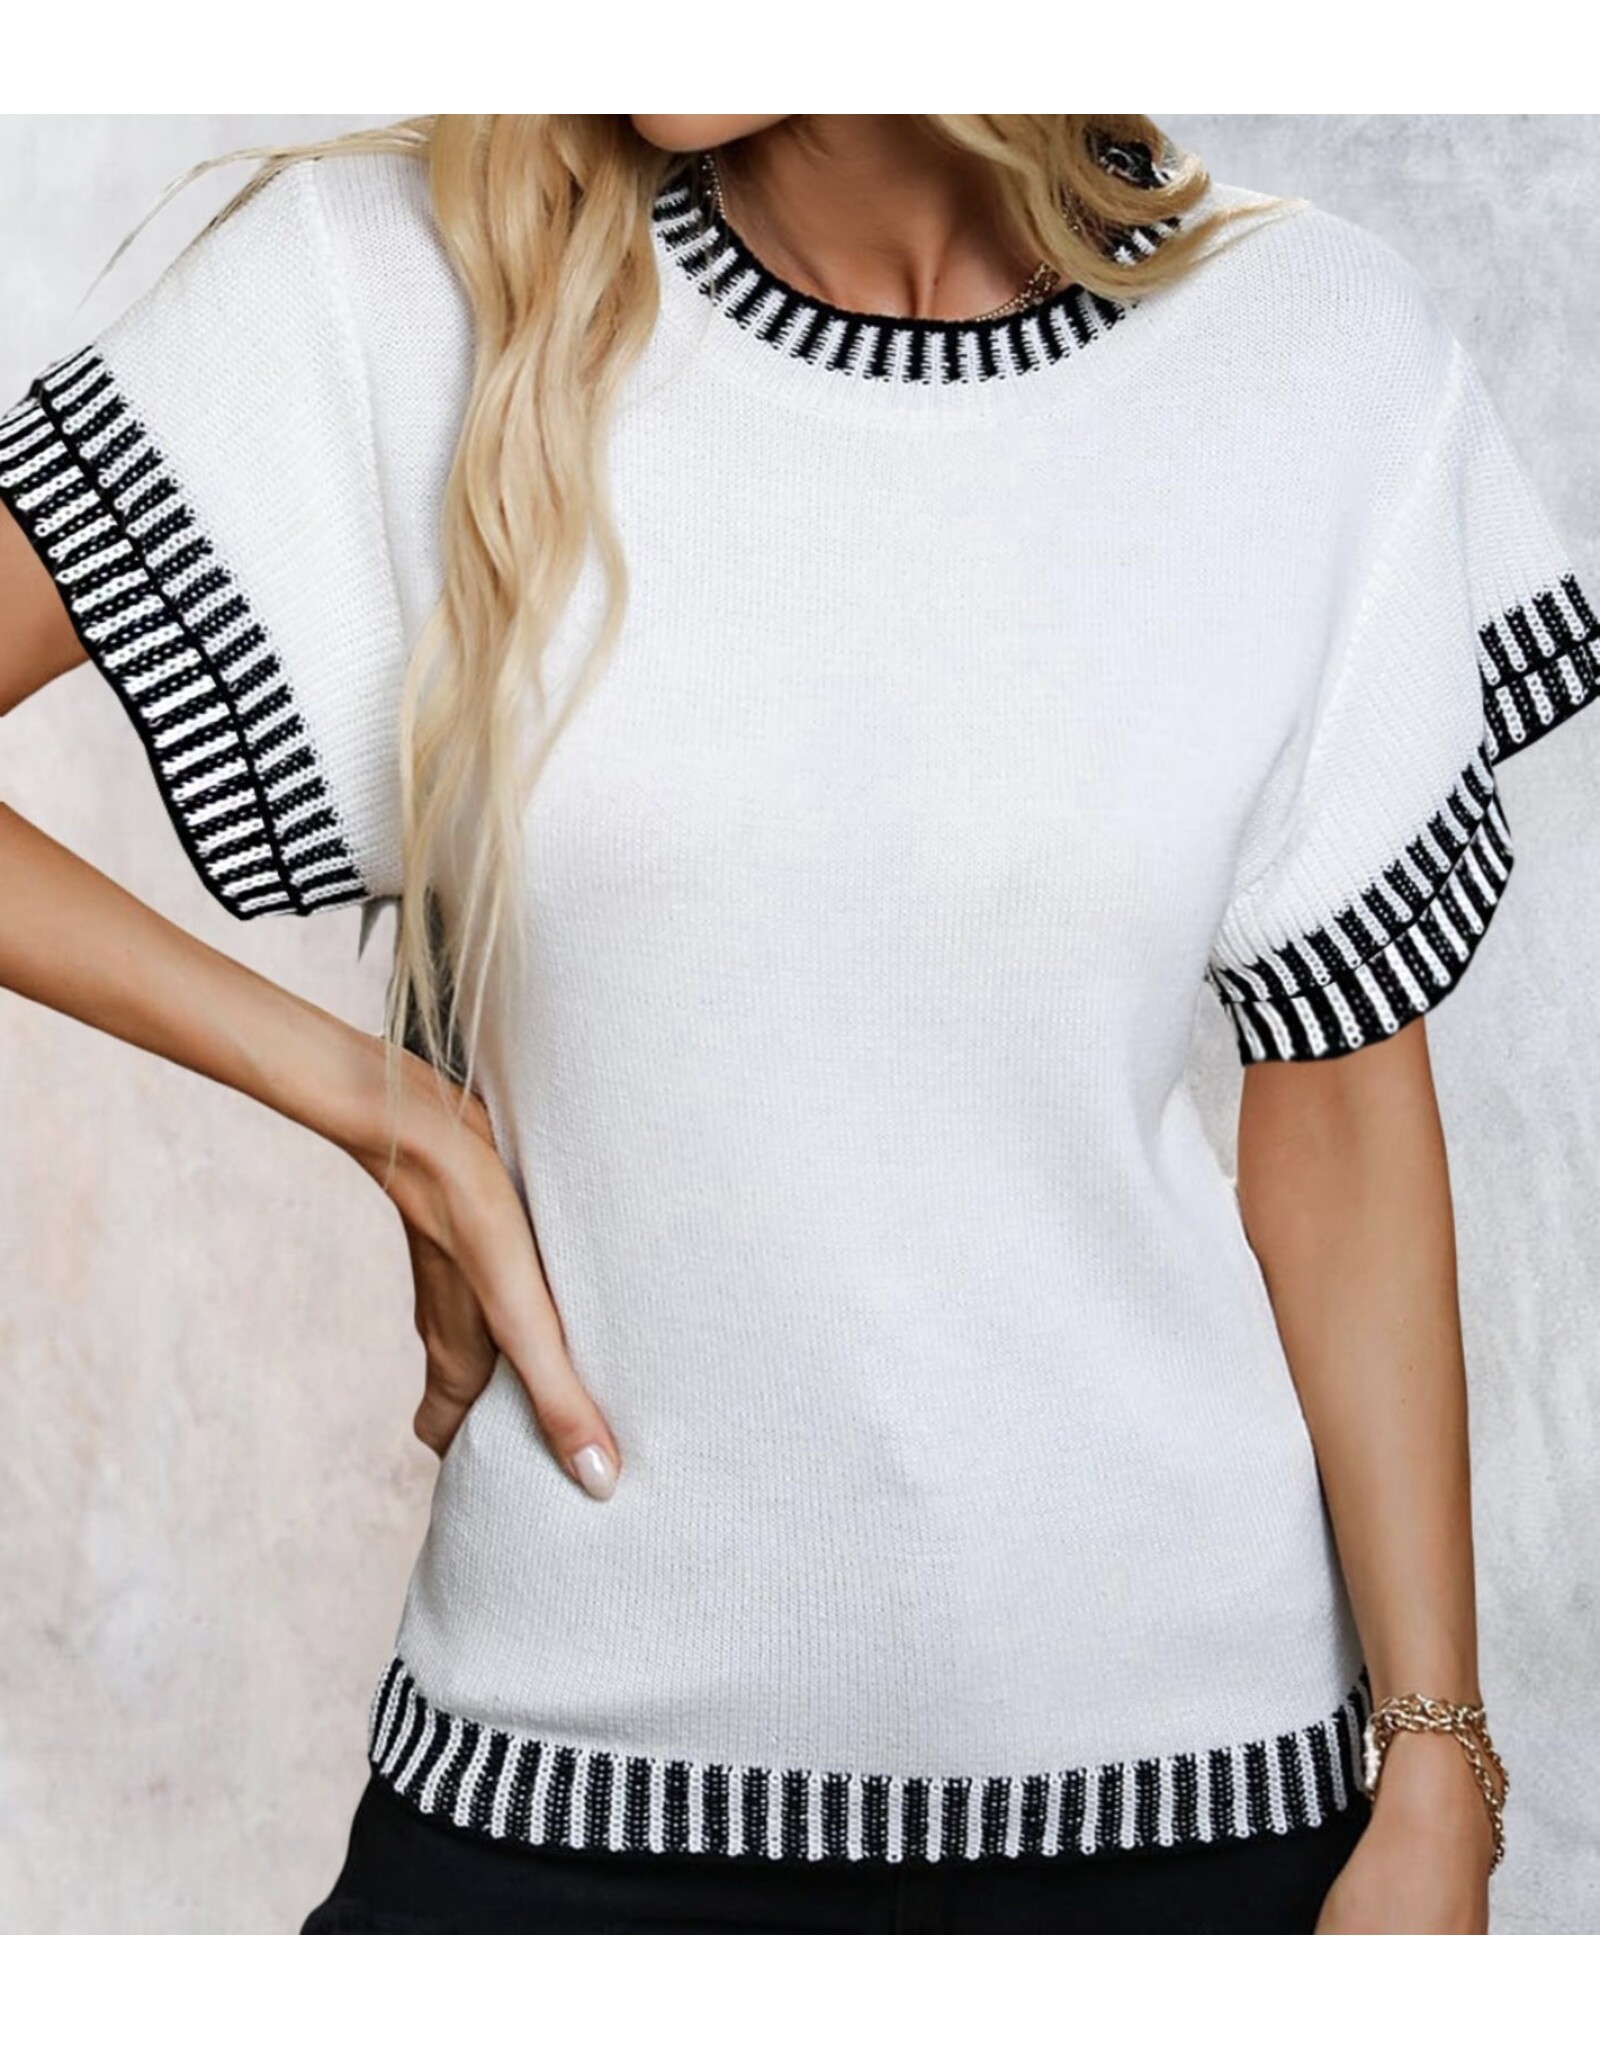 LATA White Contrast Batwing Slv Knit Top